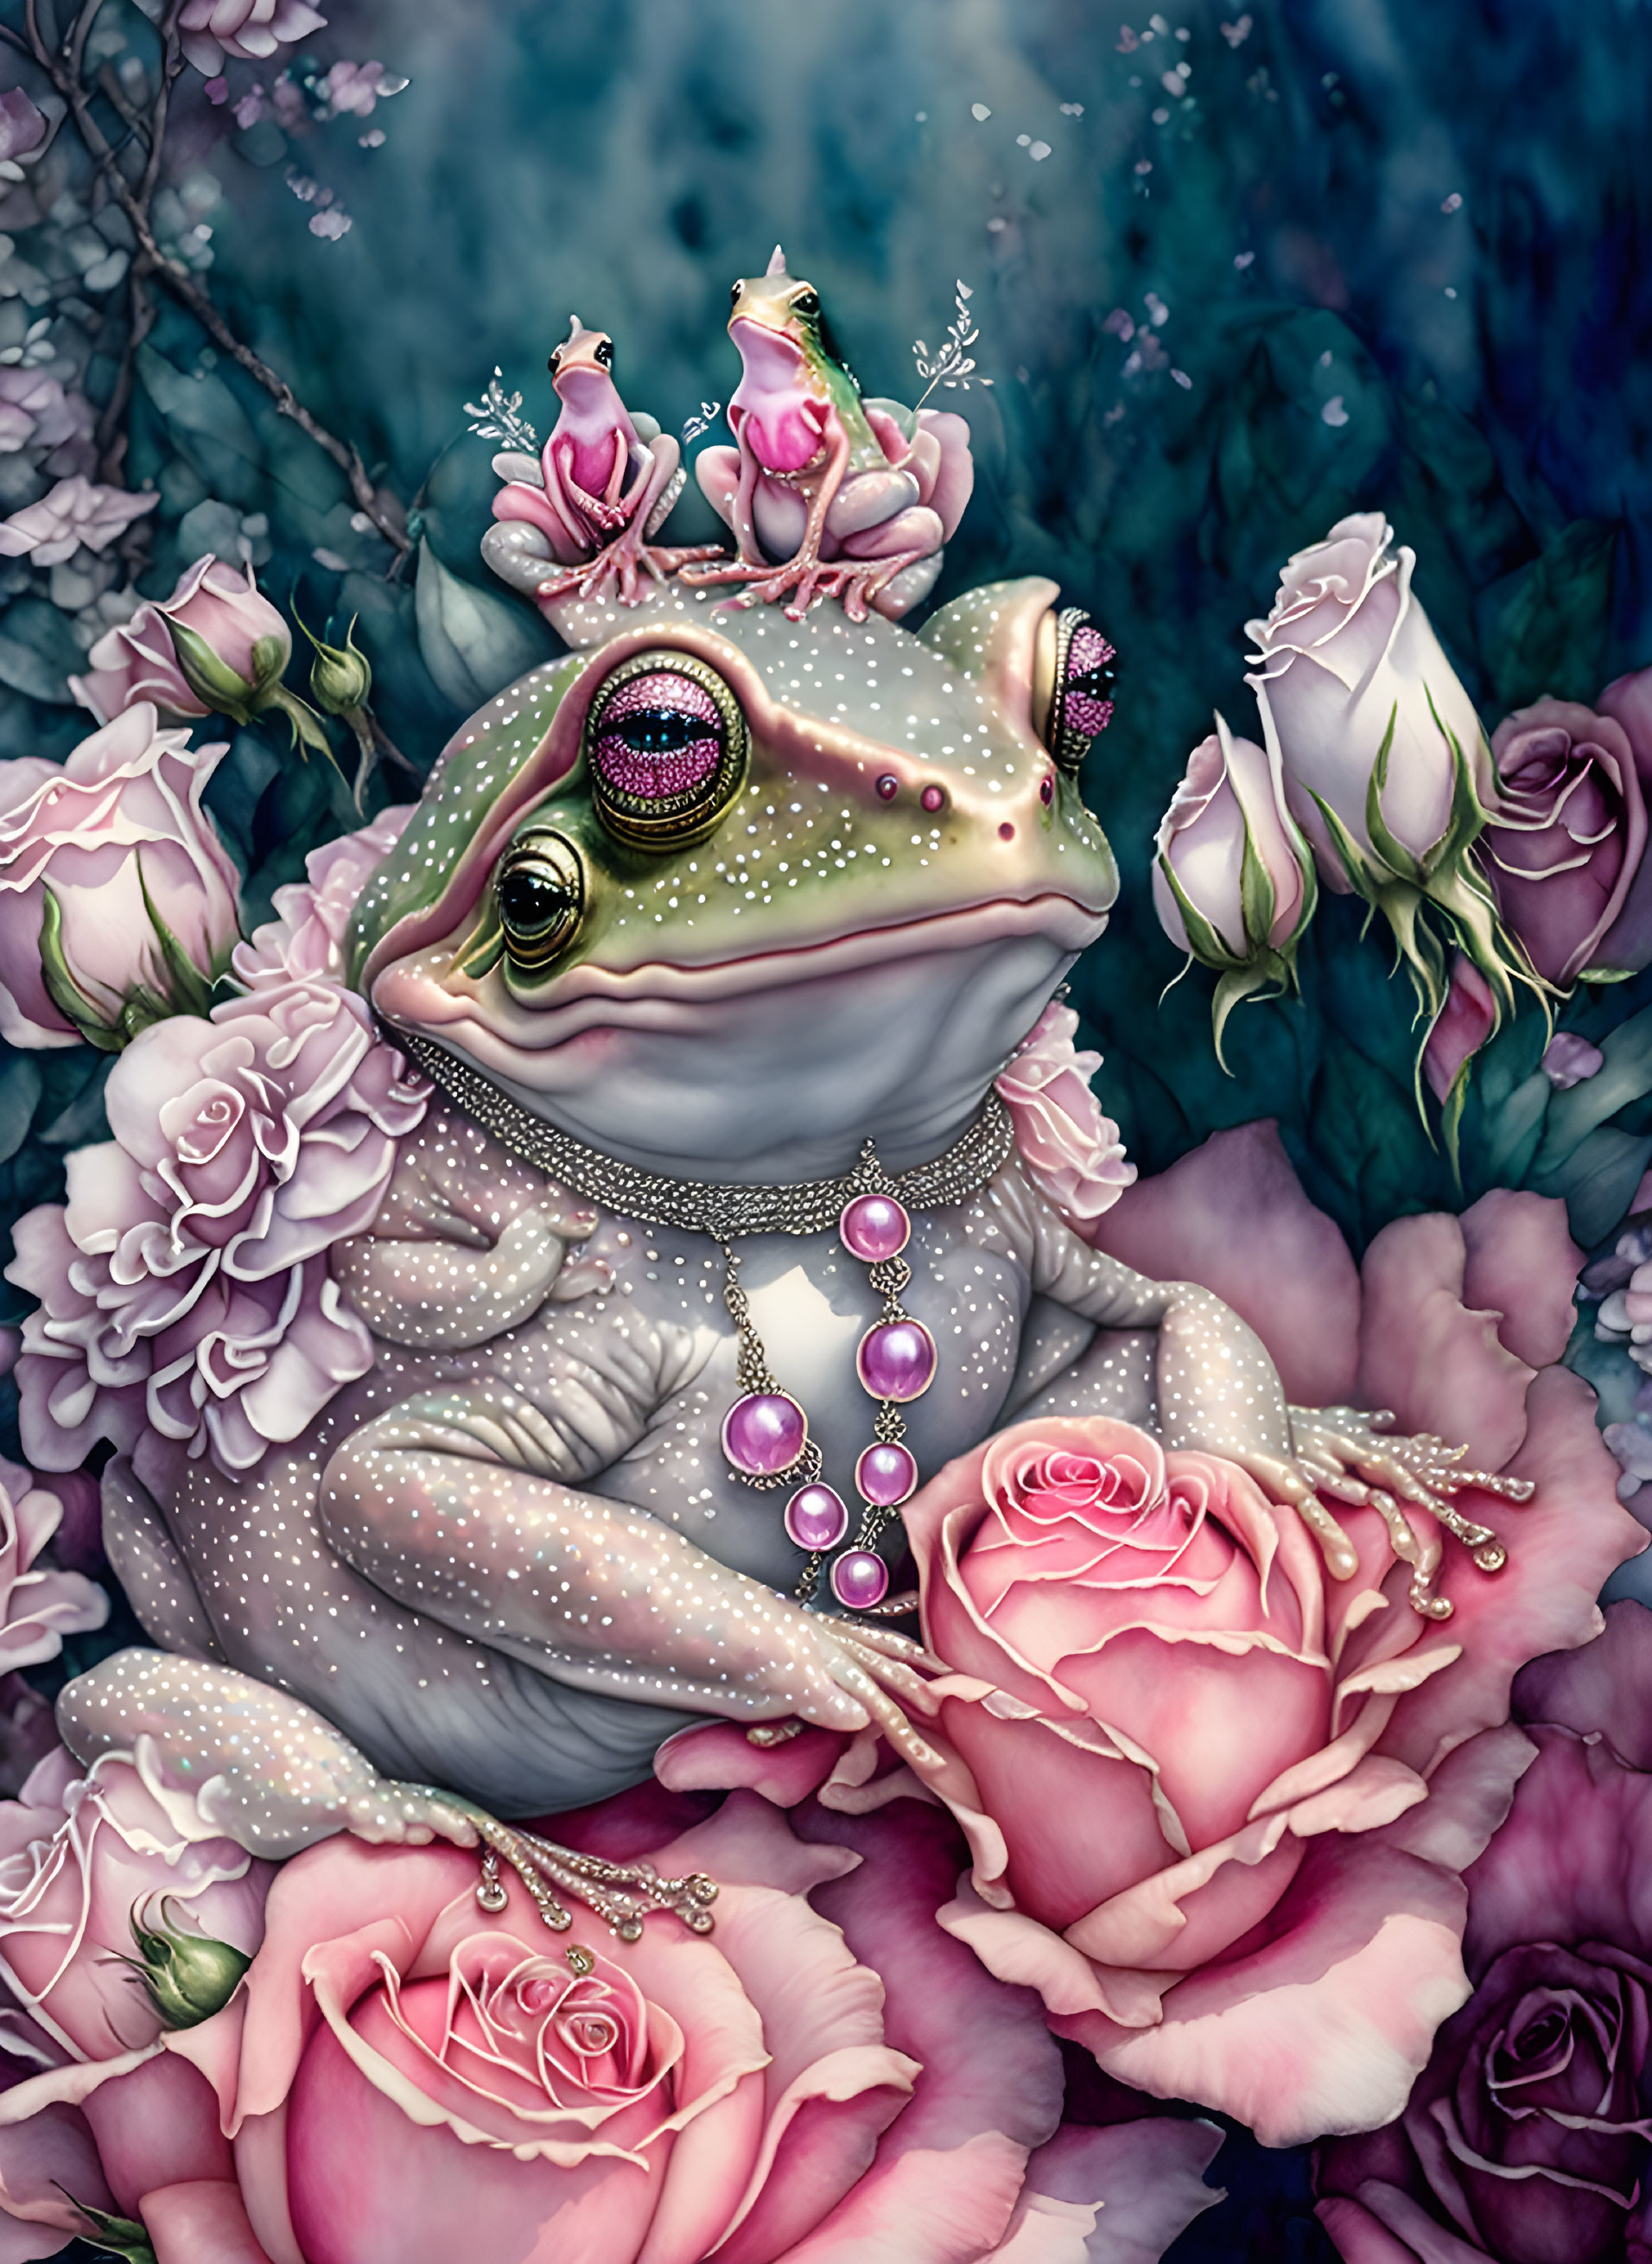 Whimsical frog with crown and necklace in pink rose setting